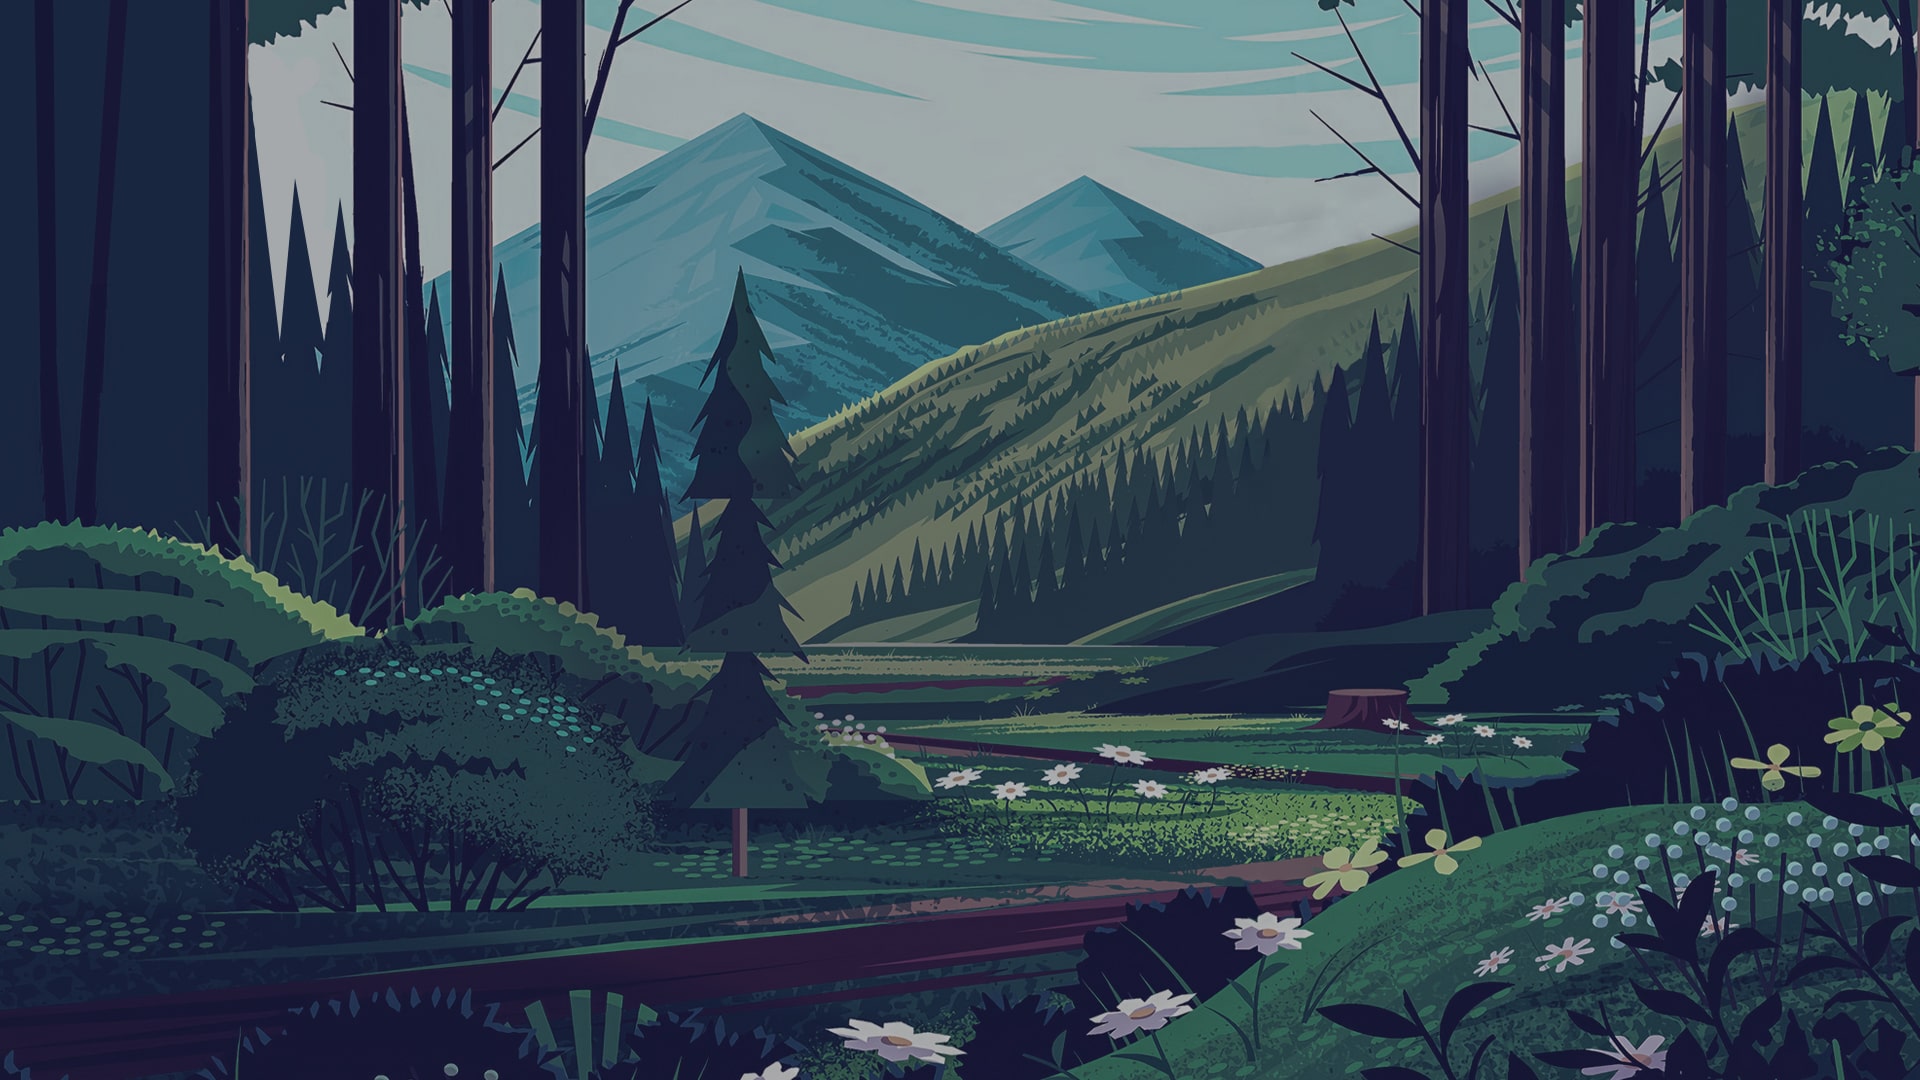 forest-background